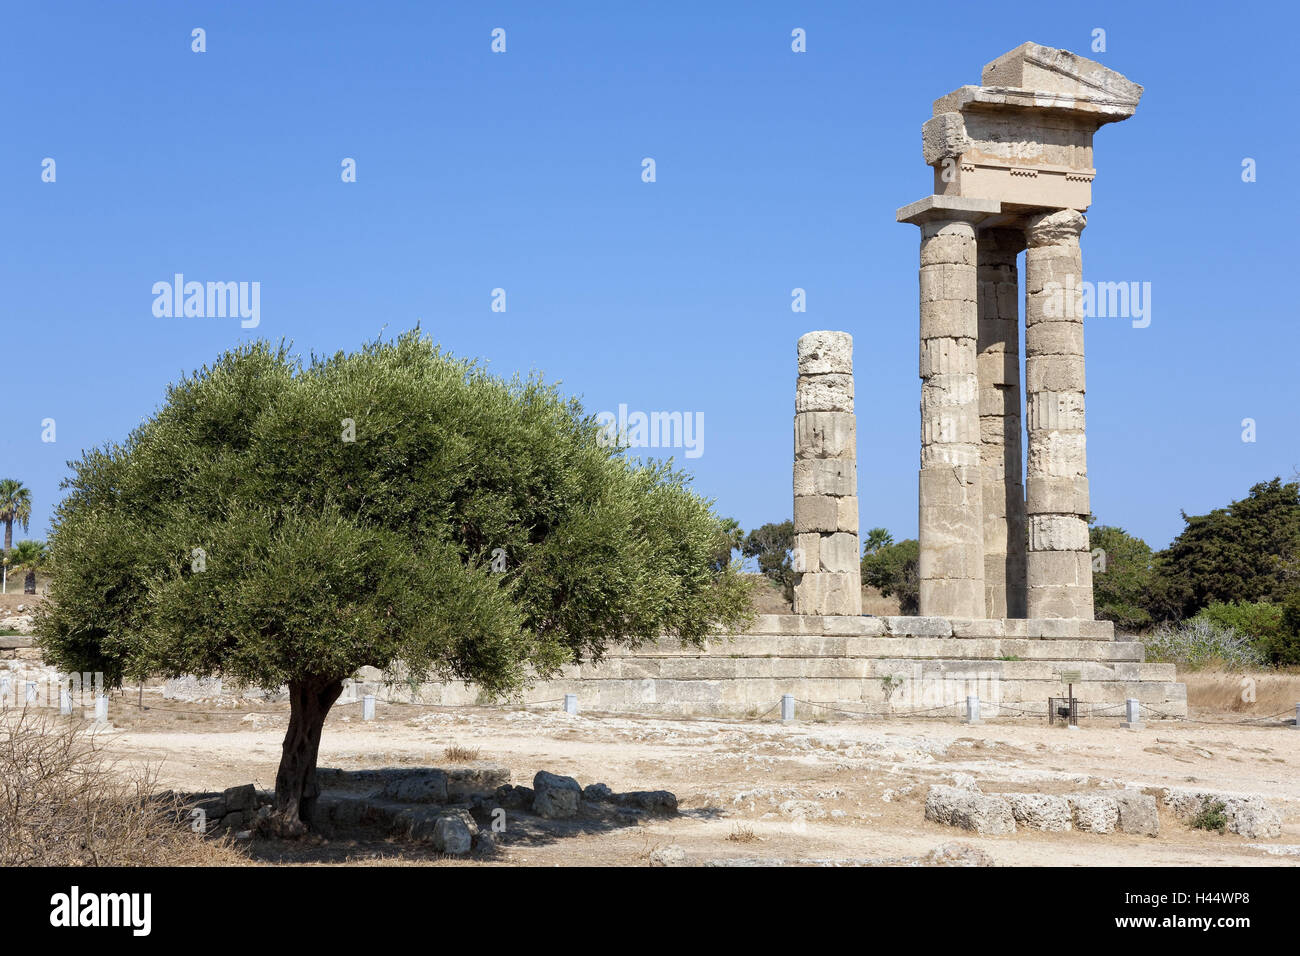 Ruins the Apollo temple, above, Rhodes town, island Rhodes, Dodekanes, Greece, Europe, old, antique, Apollo temple, Apollon Pythios temple, Apollotempel, architecture, Dodekanes, Dodekanes island, Europe, Greece, in Greek, Greek islands, historically, isl Stock Photo